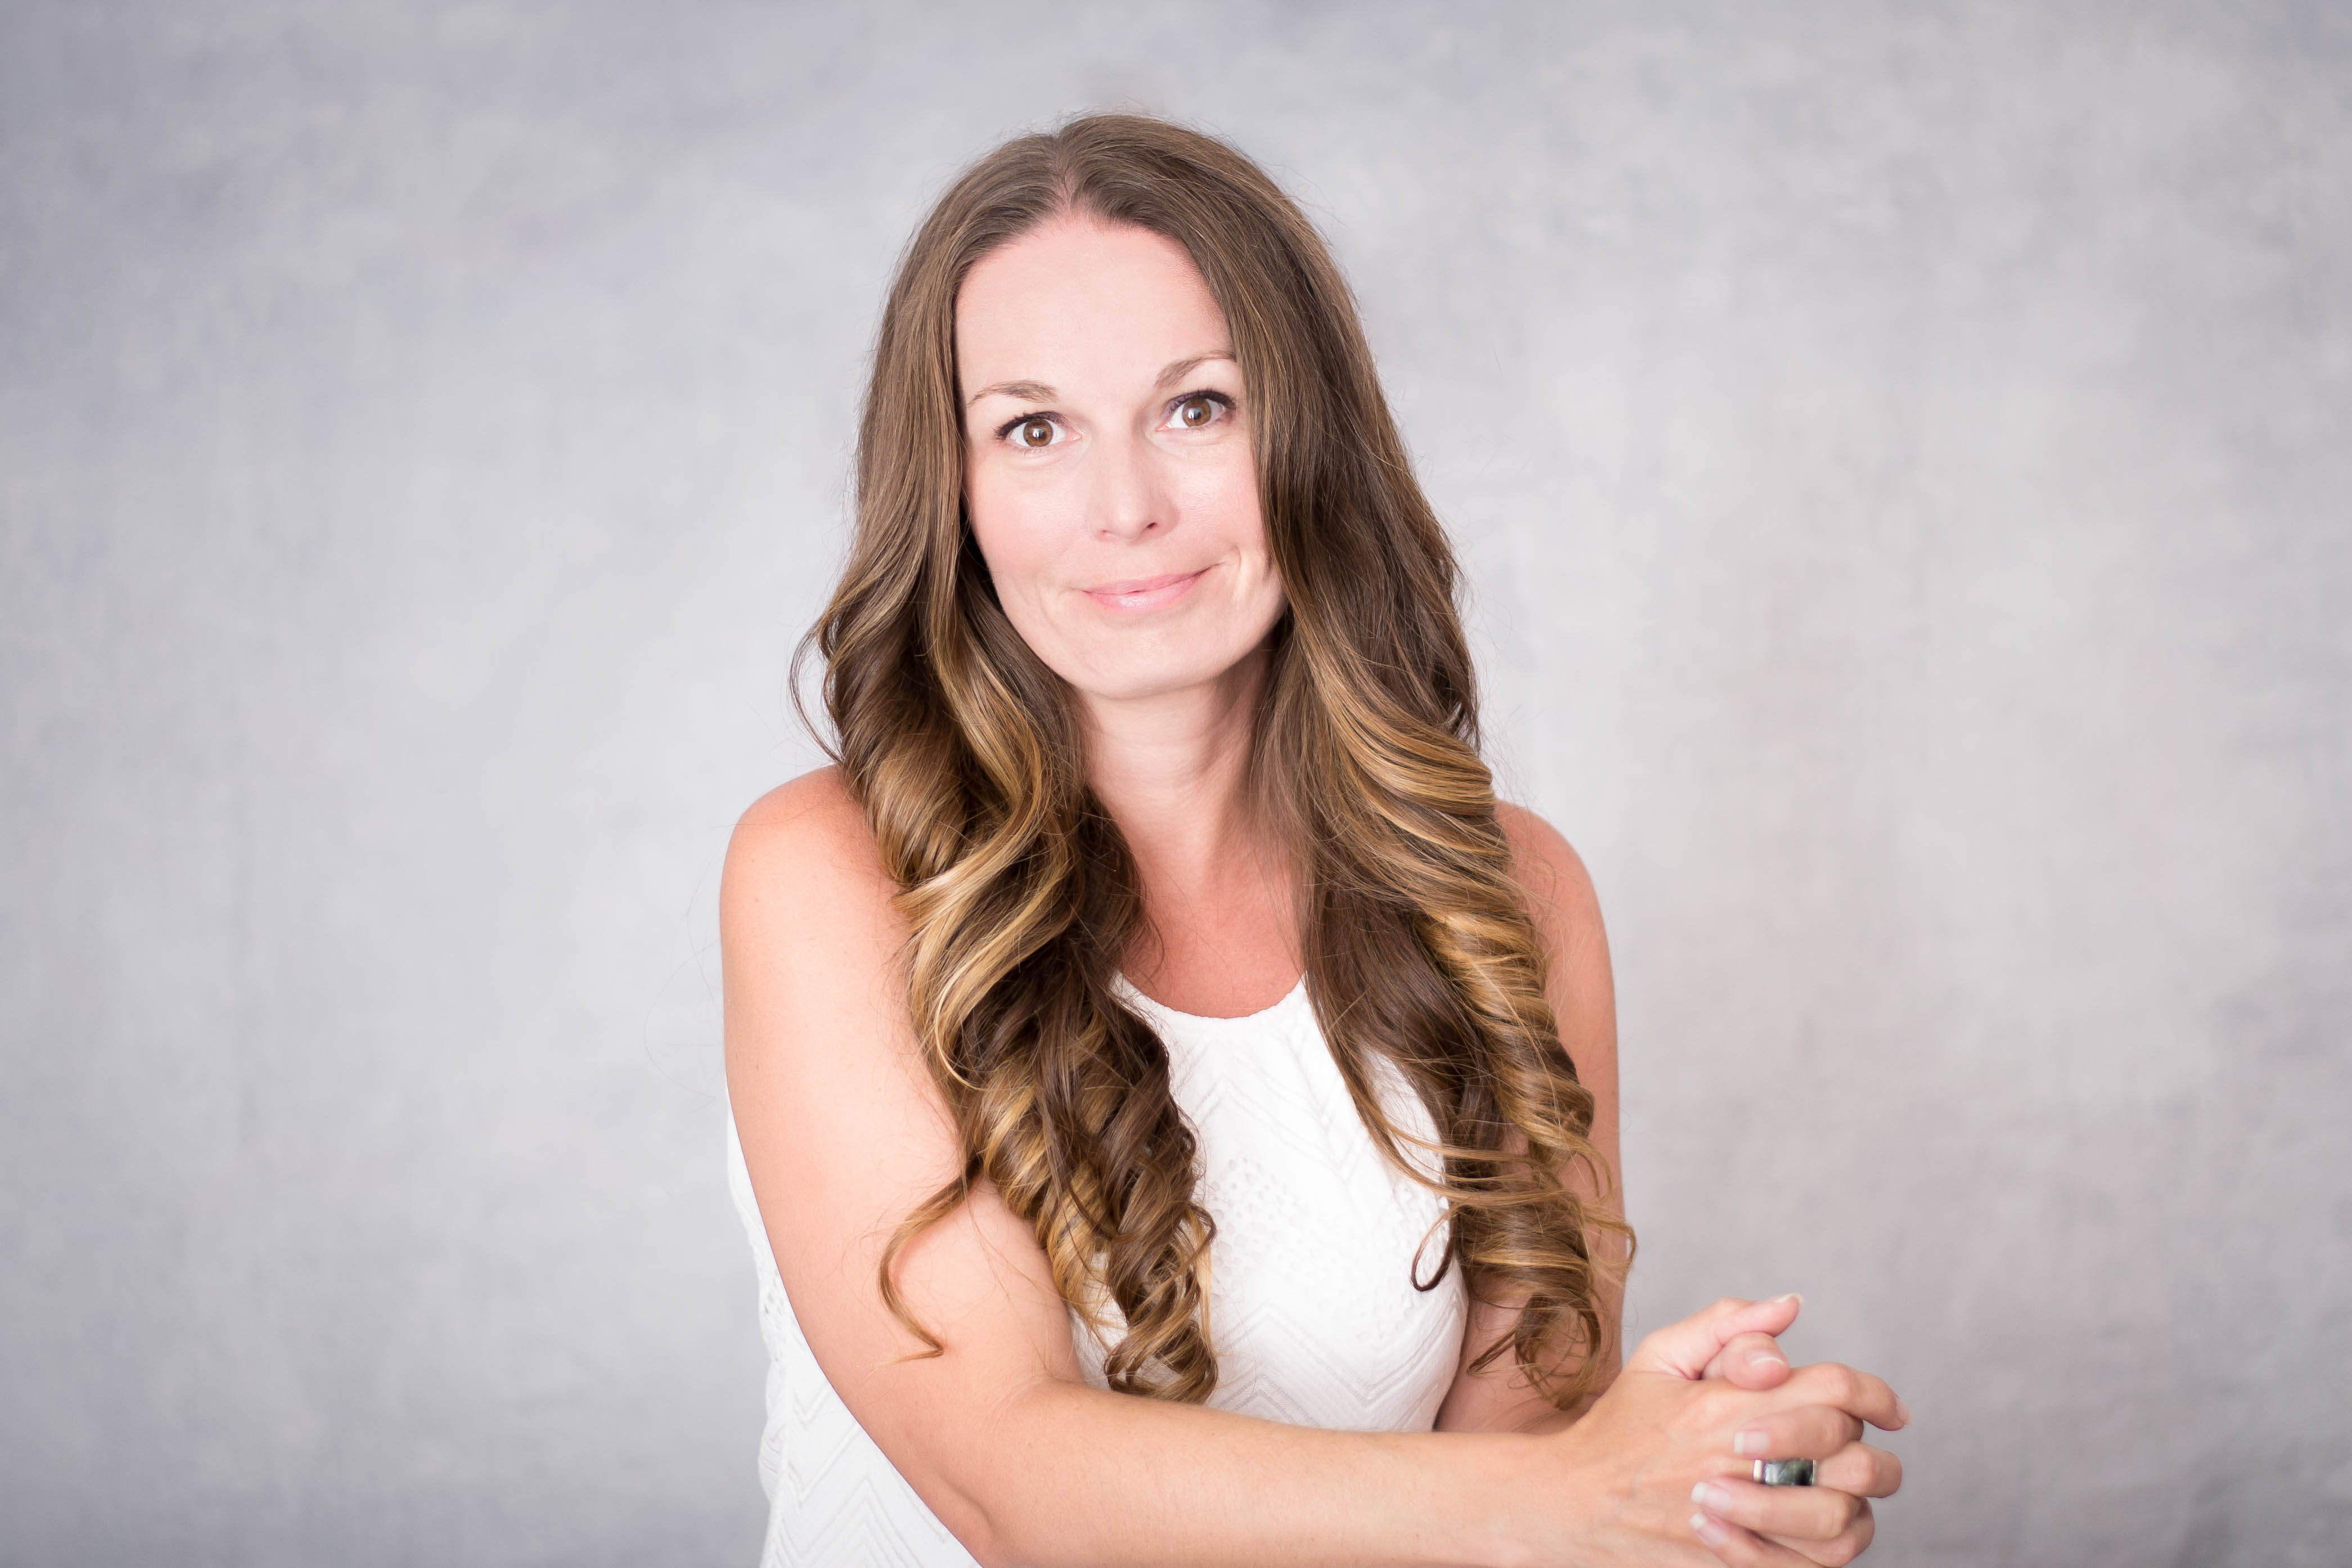 Speaker, Author, and Life Strategist Nicole Michalski believes in sharing her real life stories and experiences on what it really takes to achieve success.